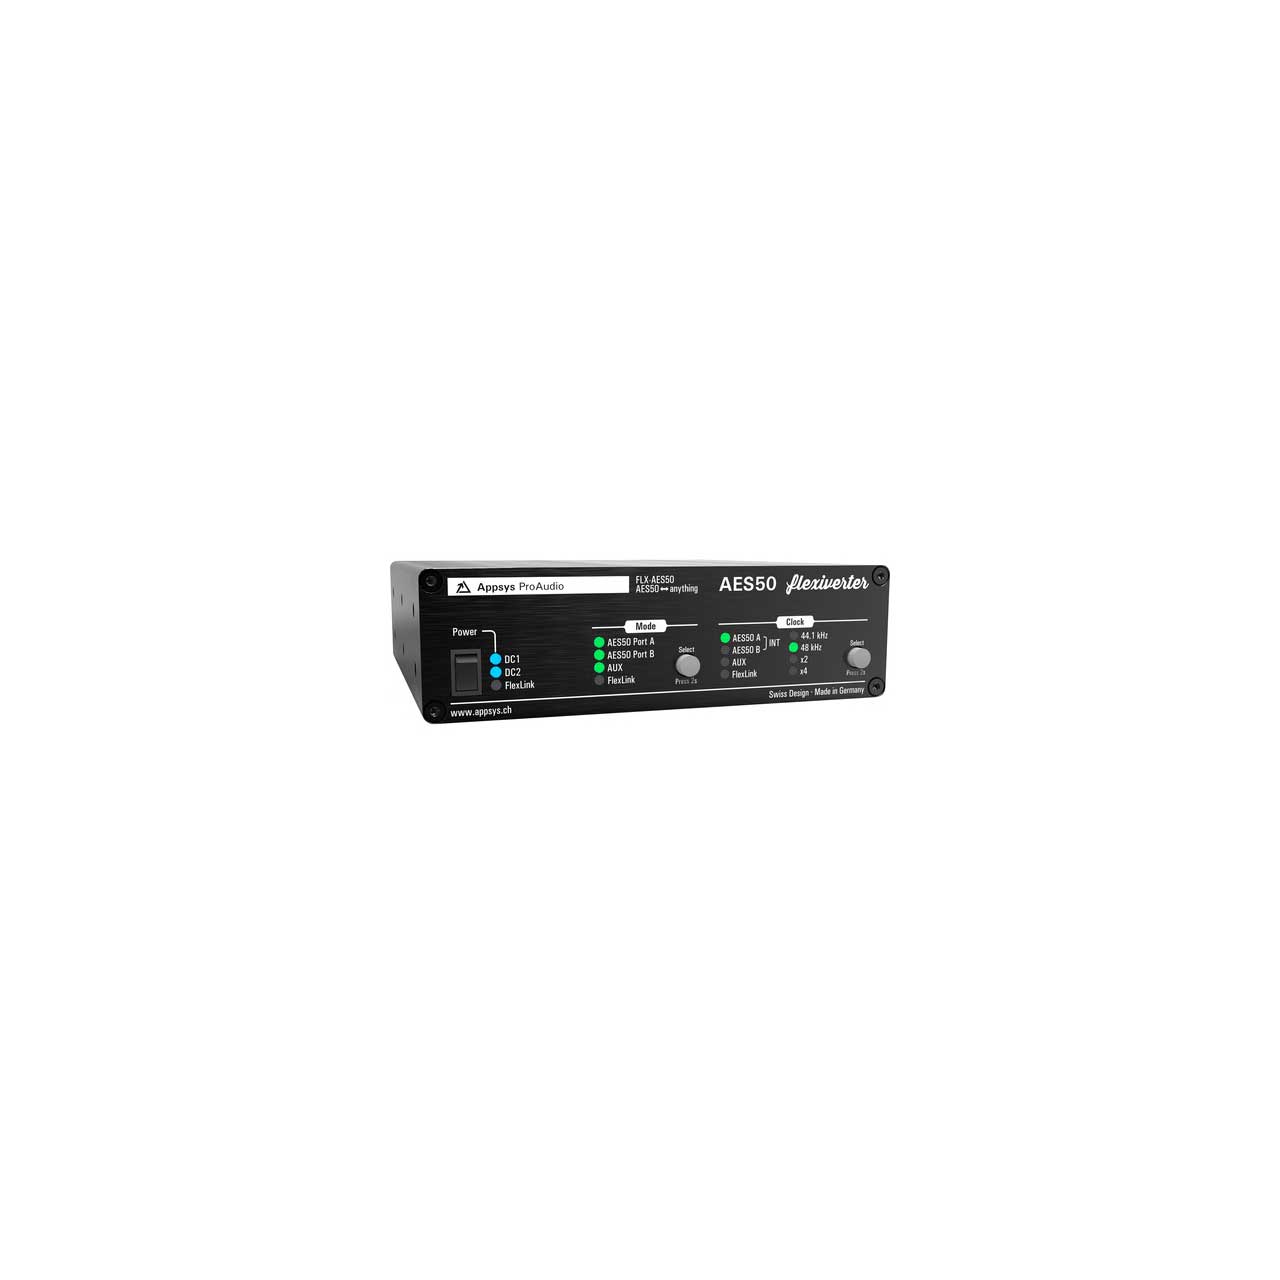 Appsys Pro Audio Flexiverter AES50 96 x 96 Channel Format Converter for AES50 FLX-AES50